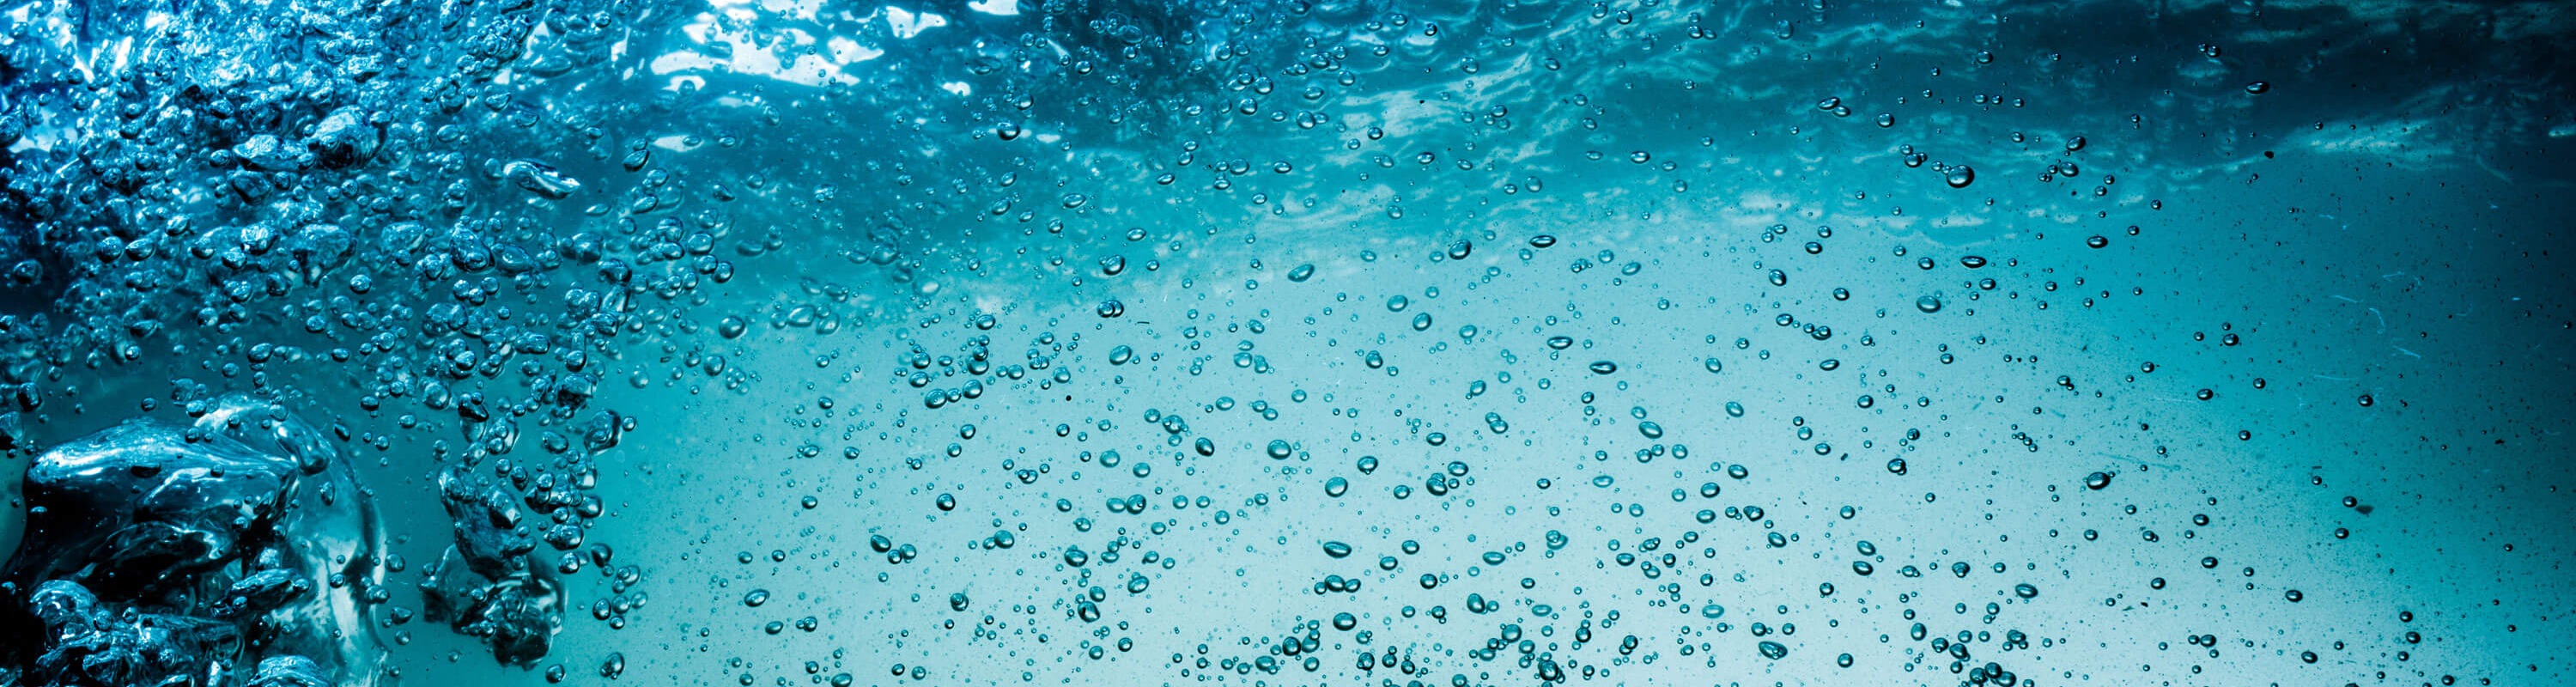 Shot of the ocean just below the surface, with numerous bubbles of different shapes and sizes rising to the top